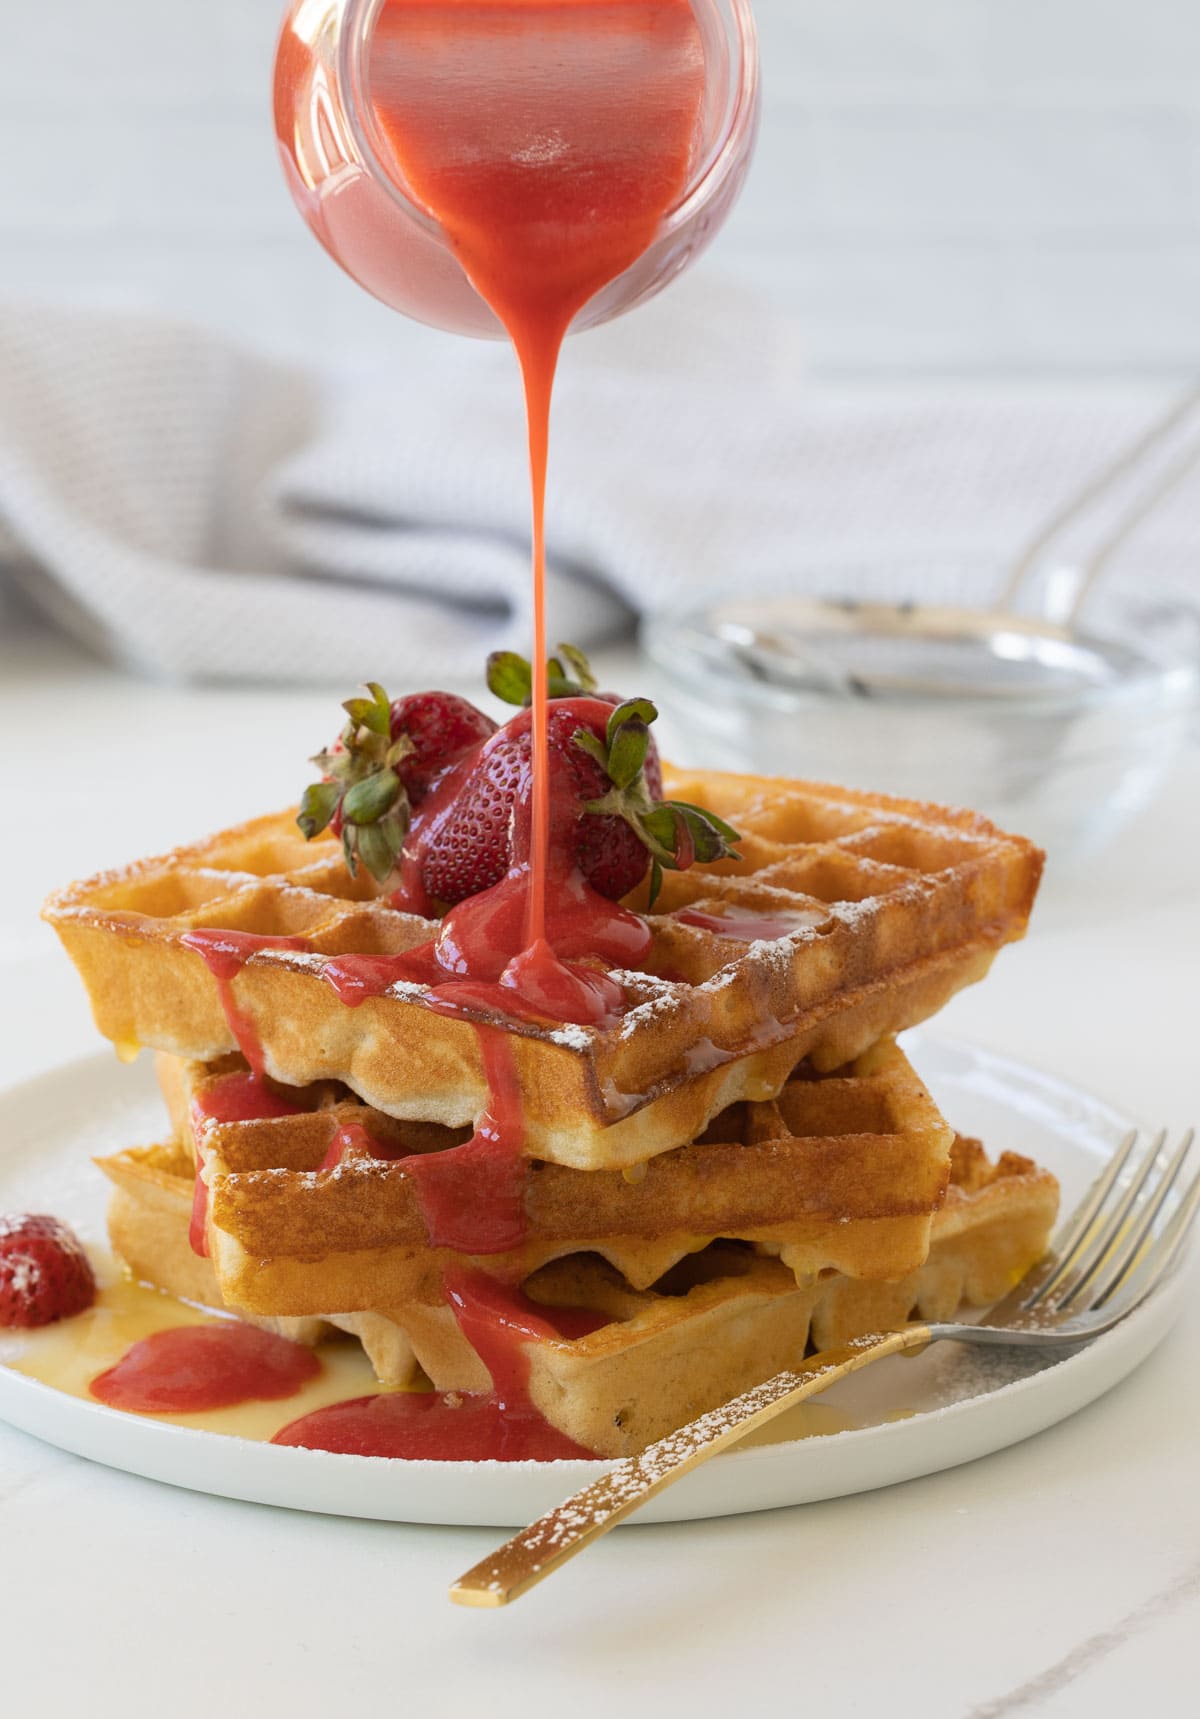 Golden gluten-free waffles with melted butter and strawberry sauce poured over the top.